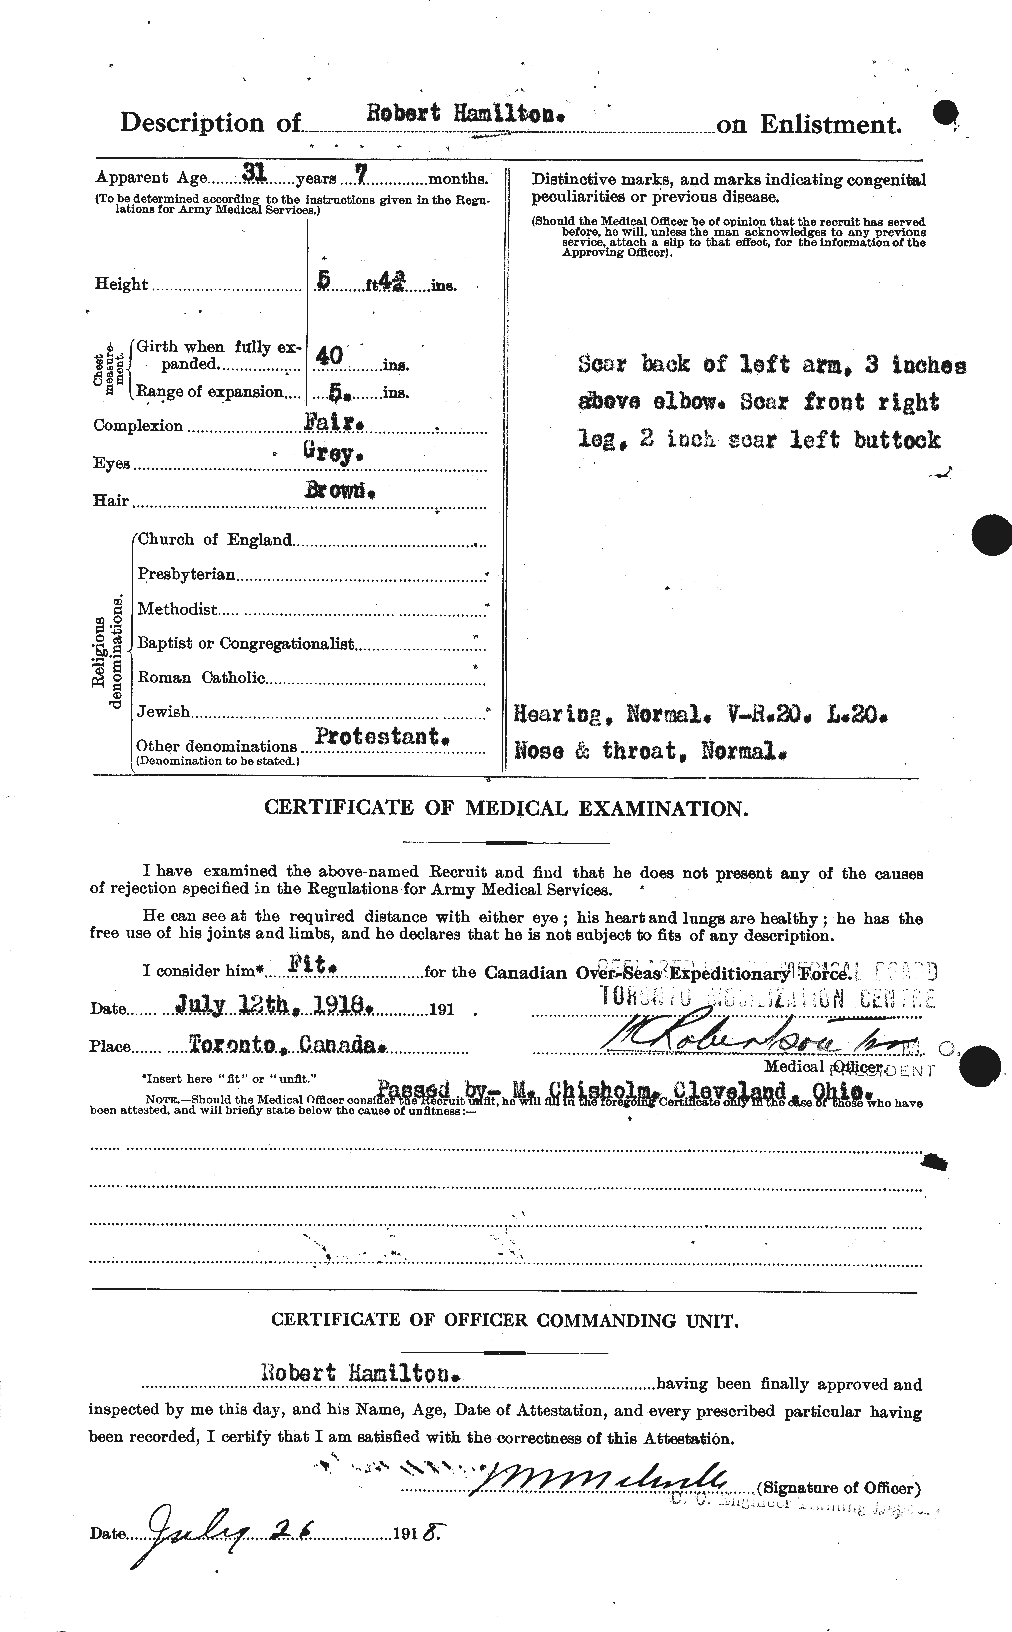 Personnel Records of the First World War - CEF 373225b